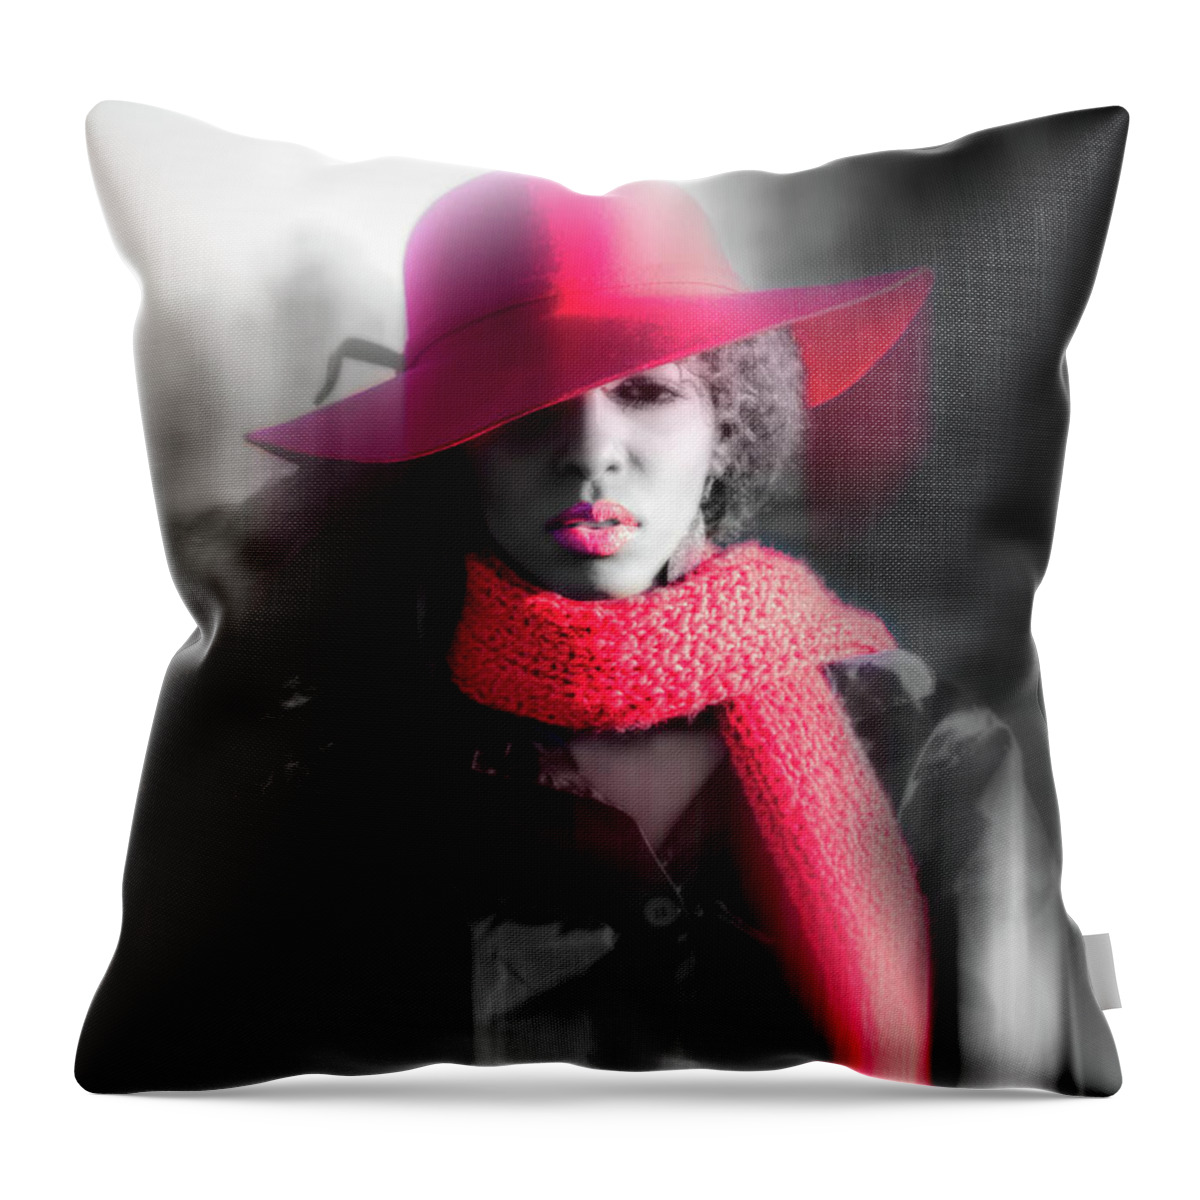 Red Hat Throw Pillow featuring the photograph Red hat by Lilia S